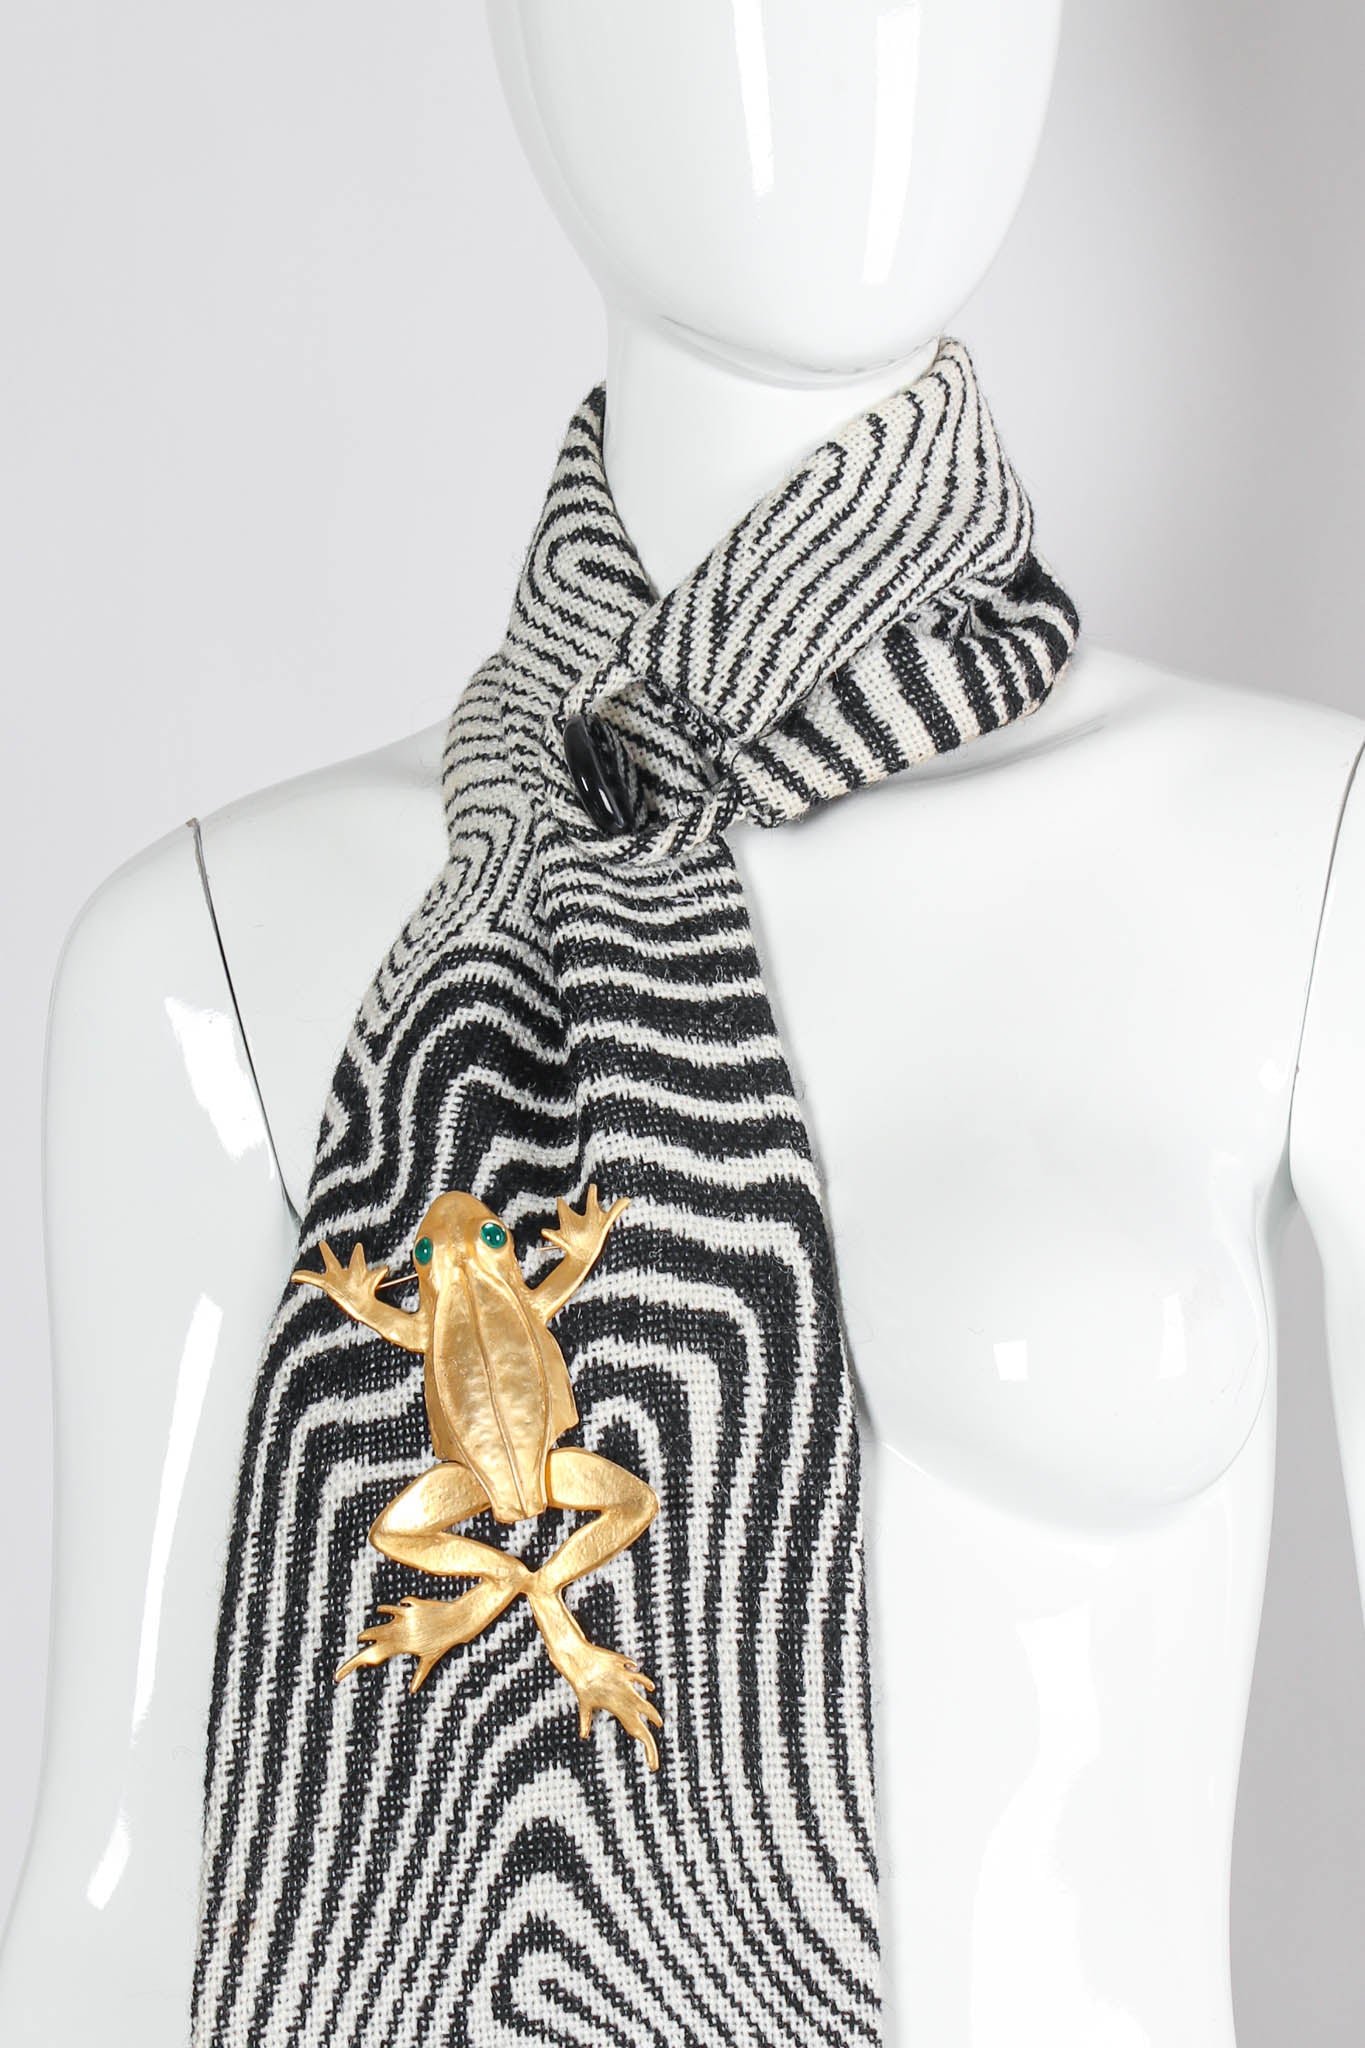 Vintage Kenneth Jay Lane Leaping Frog Brooch on mannequin scarf @ Recess Los Angeles